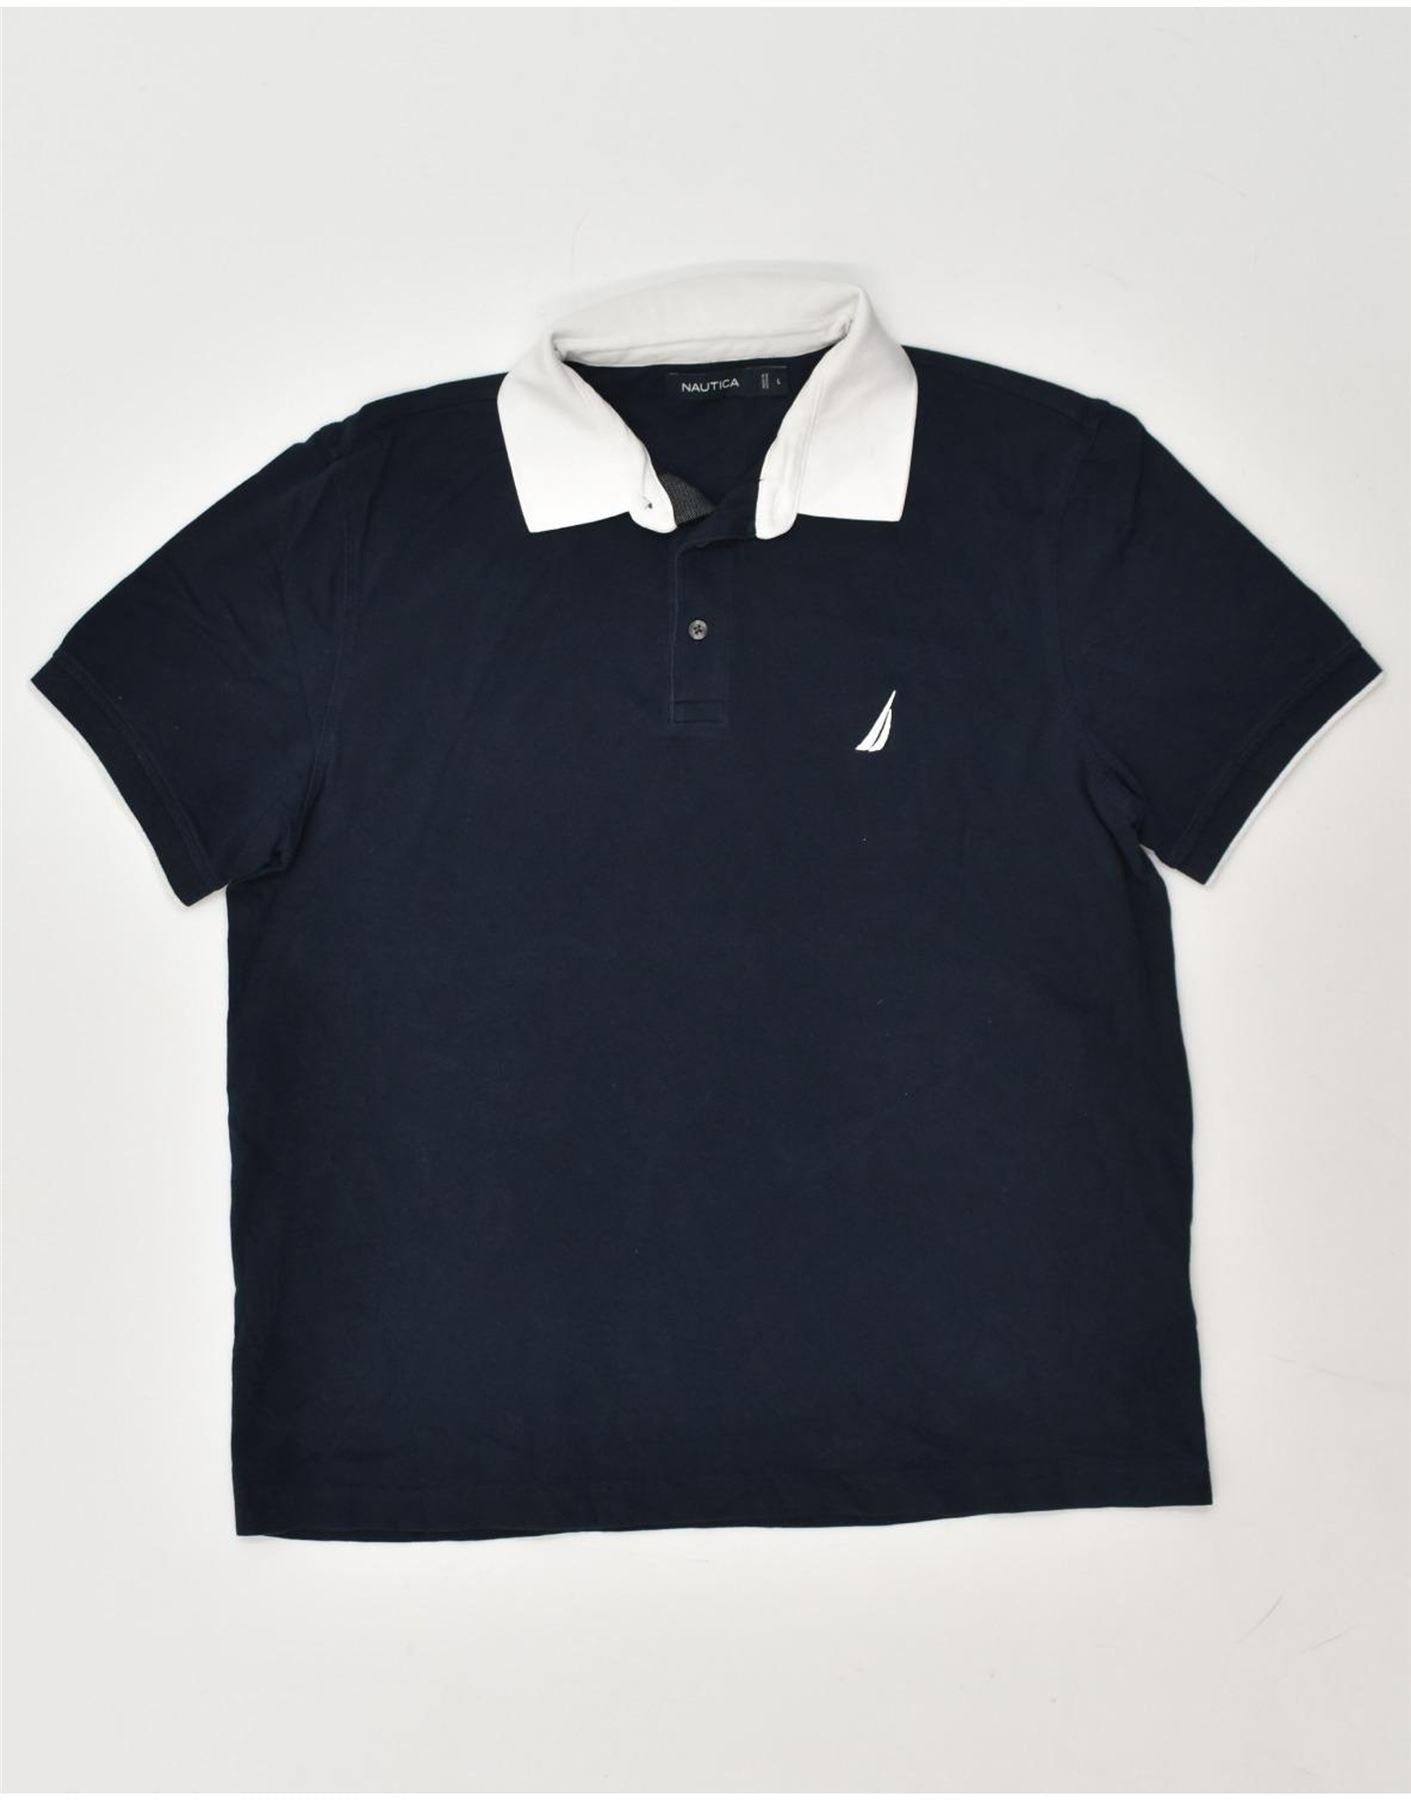 NAUTICA Mens Polo Shirt Large Navy Blue Cotton, Vintage & Second-Hand  Clothing Online